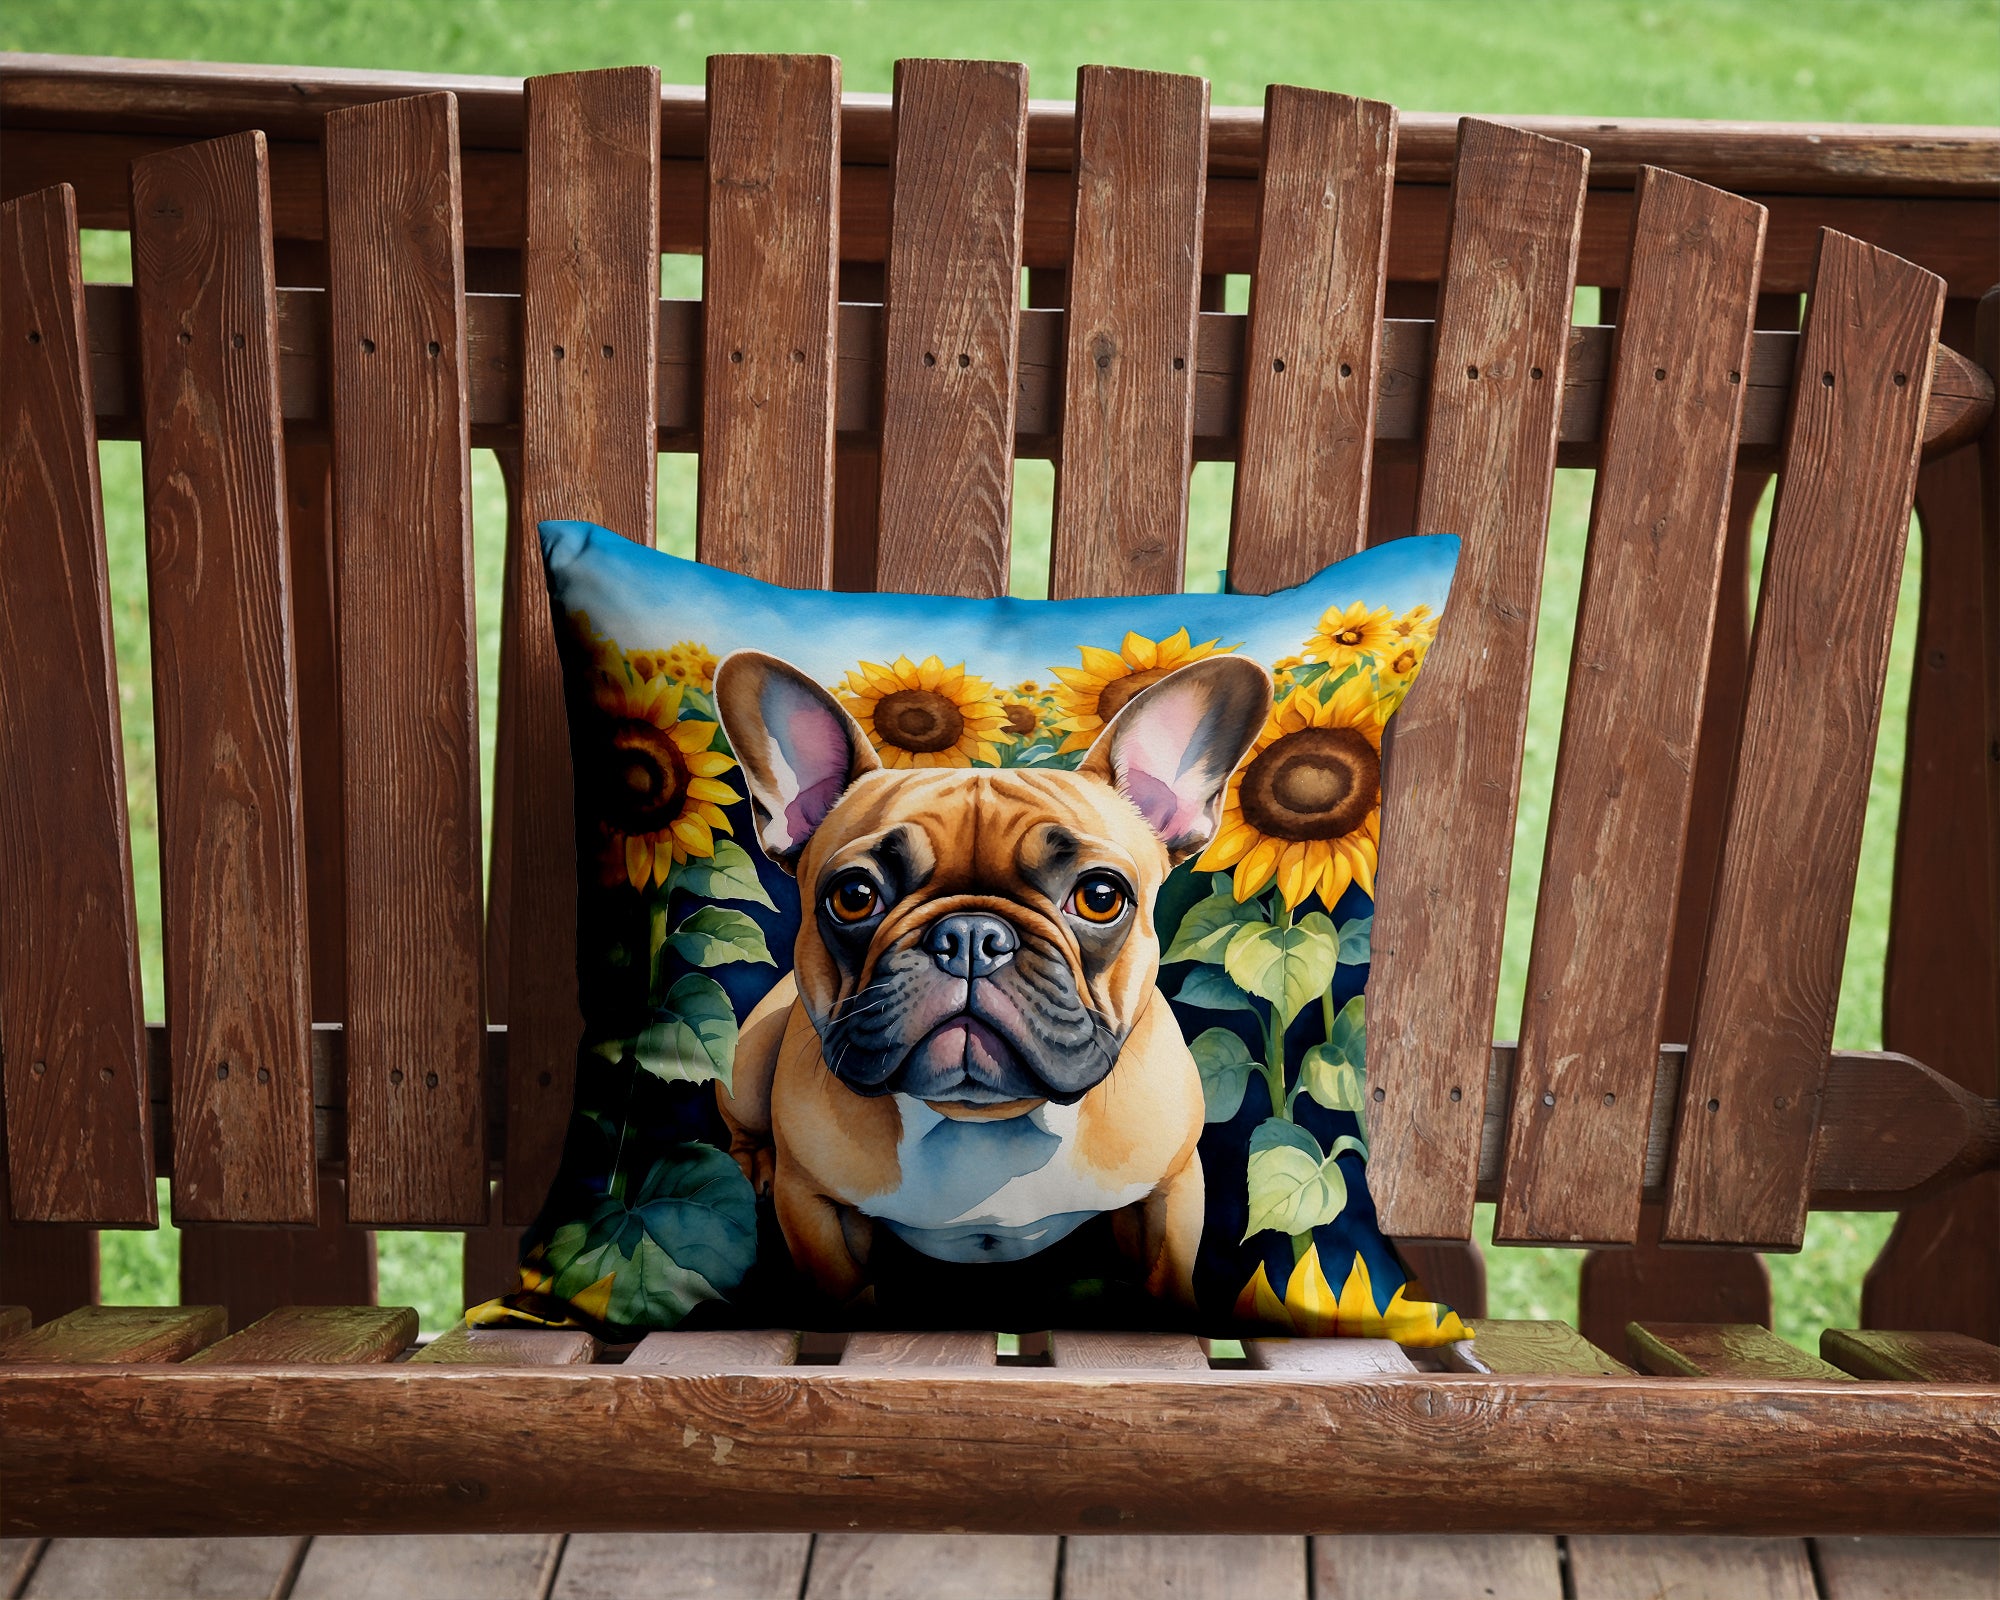 Buy this French Bulldog in Sunflowers Throw Pillow